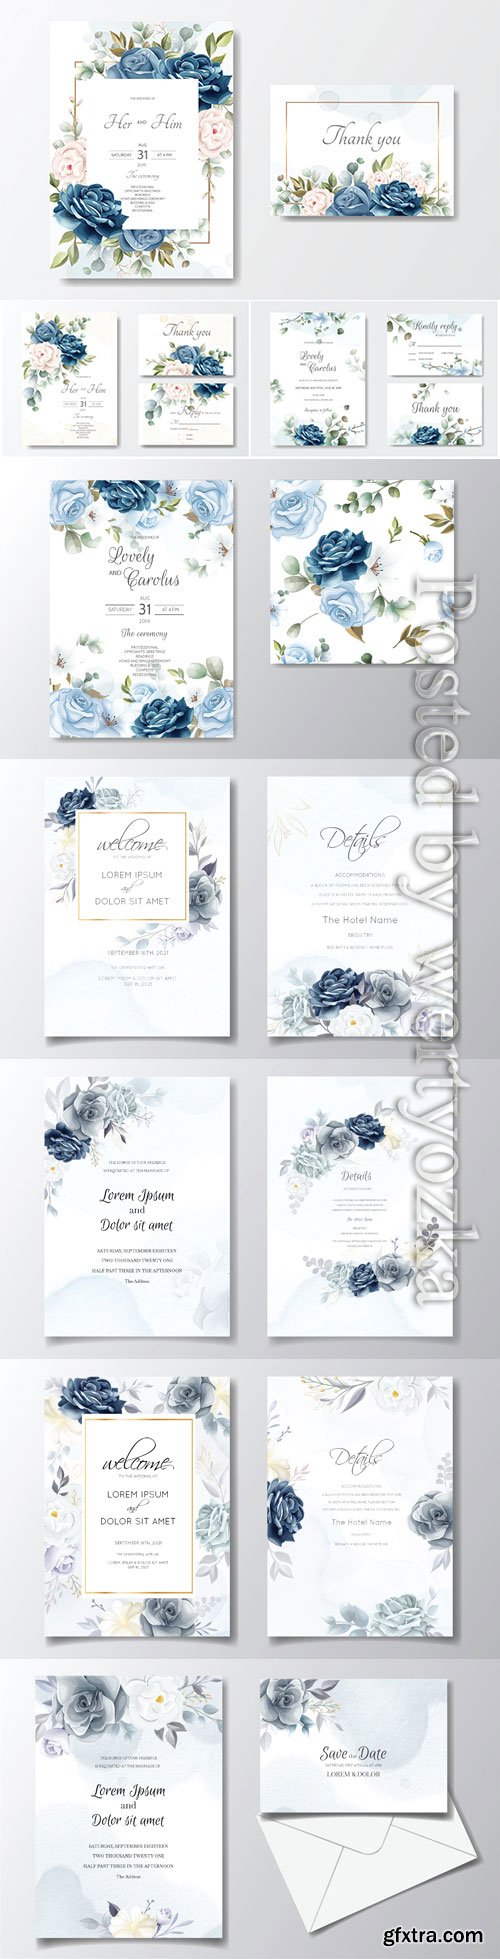 Navy blue floral wedding invitation card template with golden leaves and watercolor frame